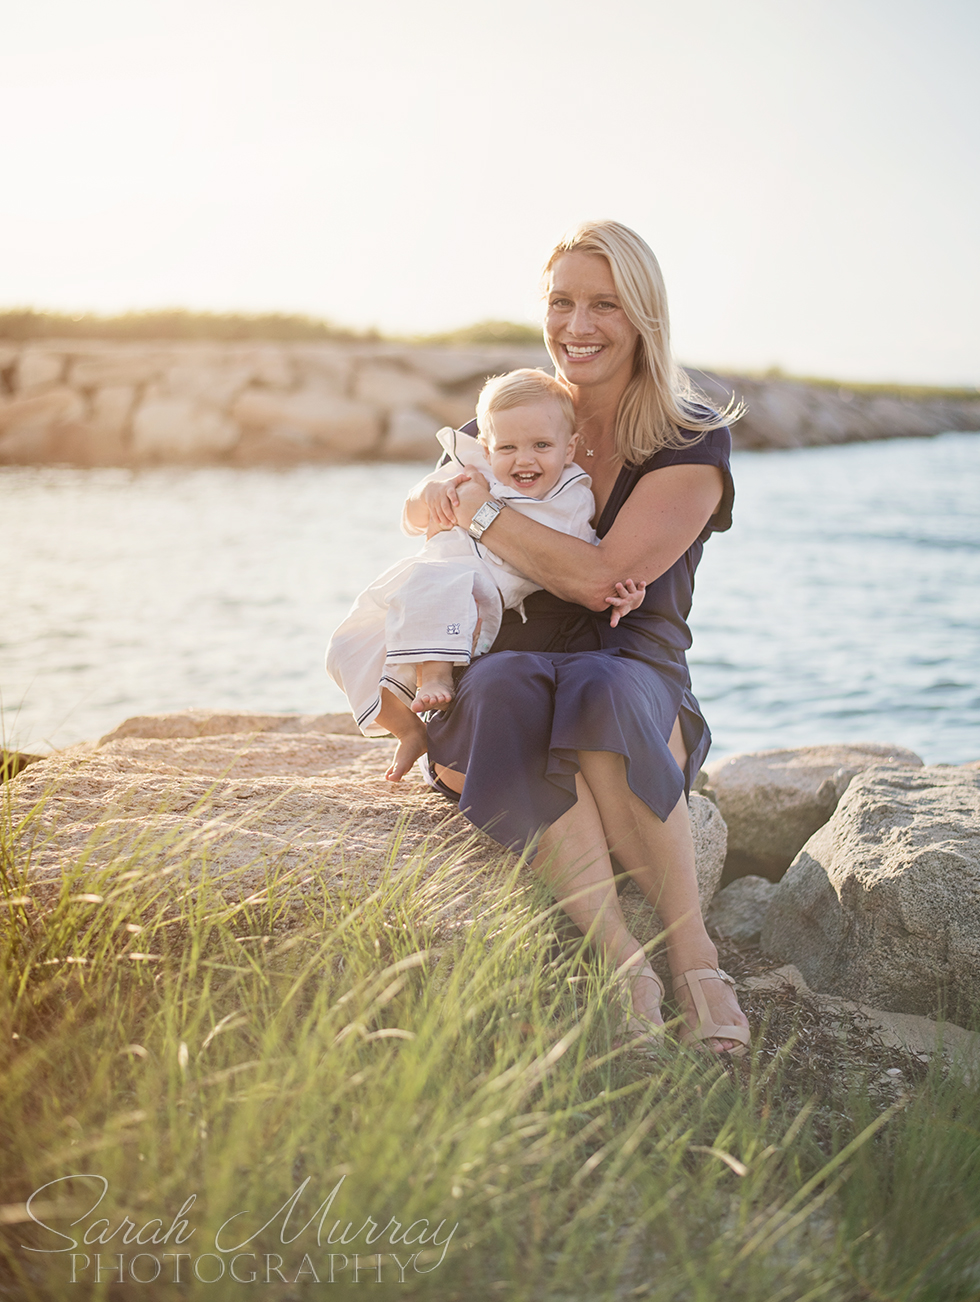 Private Home Beach Cape Cod Family Photo Session, Falmouth, Massachusetts - Sarah Murray Photography